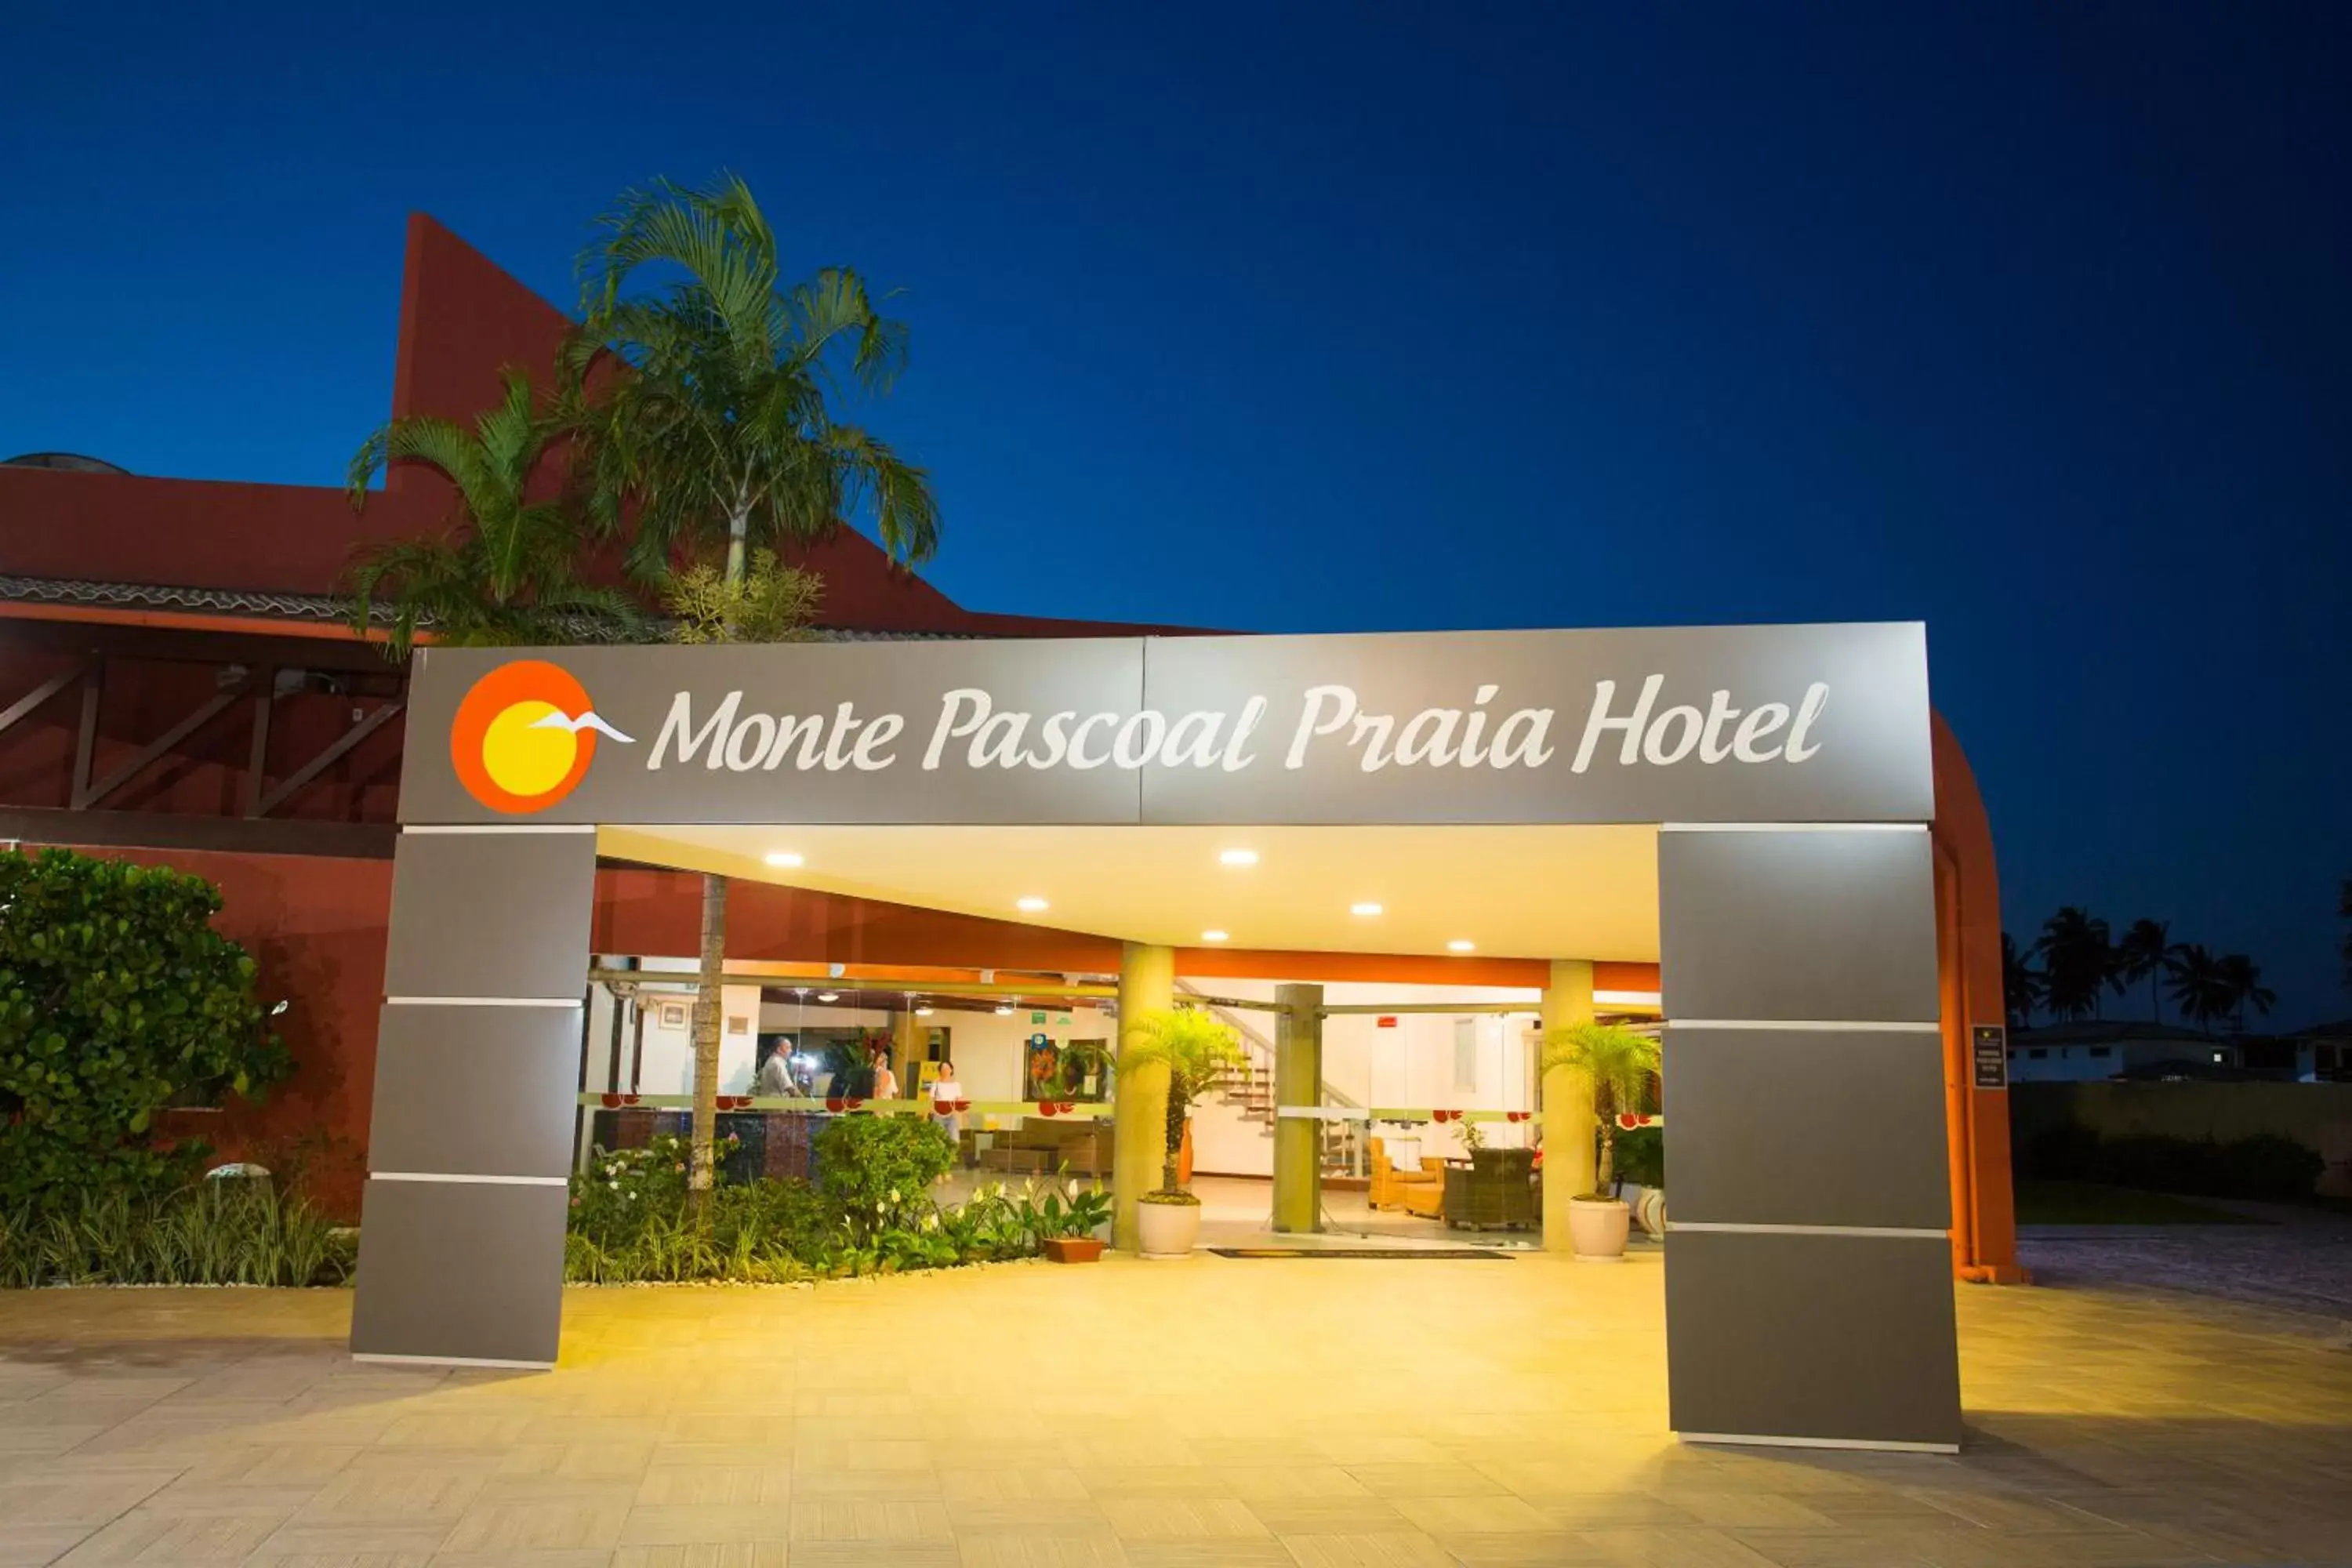 Property building in Monte Pascoal Praia Hotel